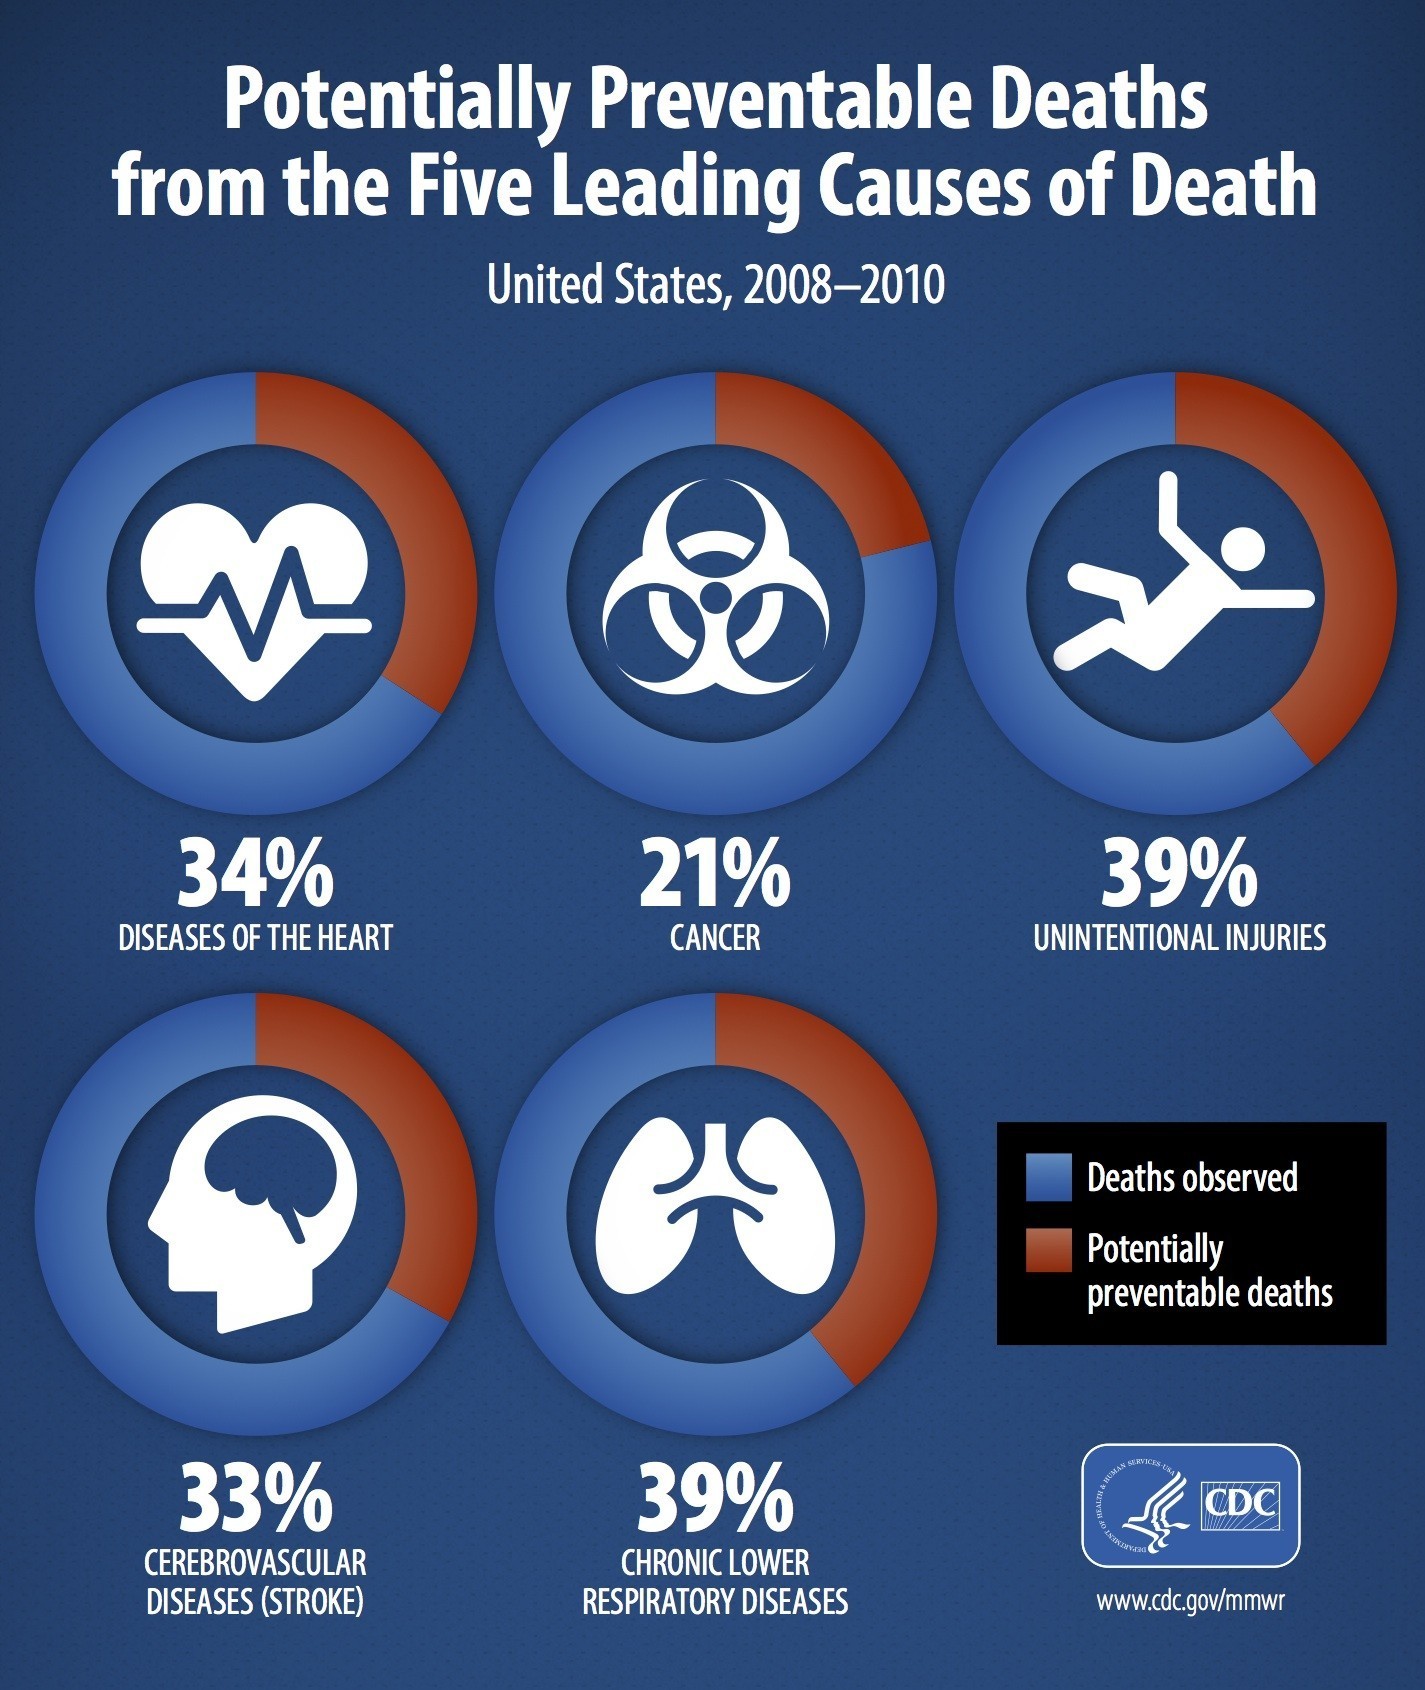 Report Behavior Changes Can Prevent Deaths from Cancer and Other